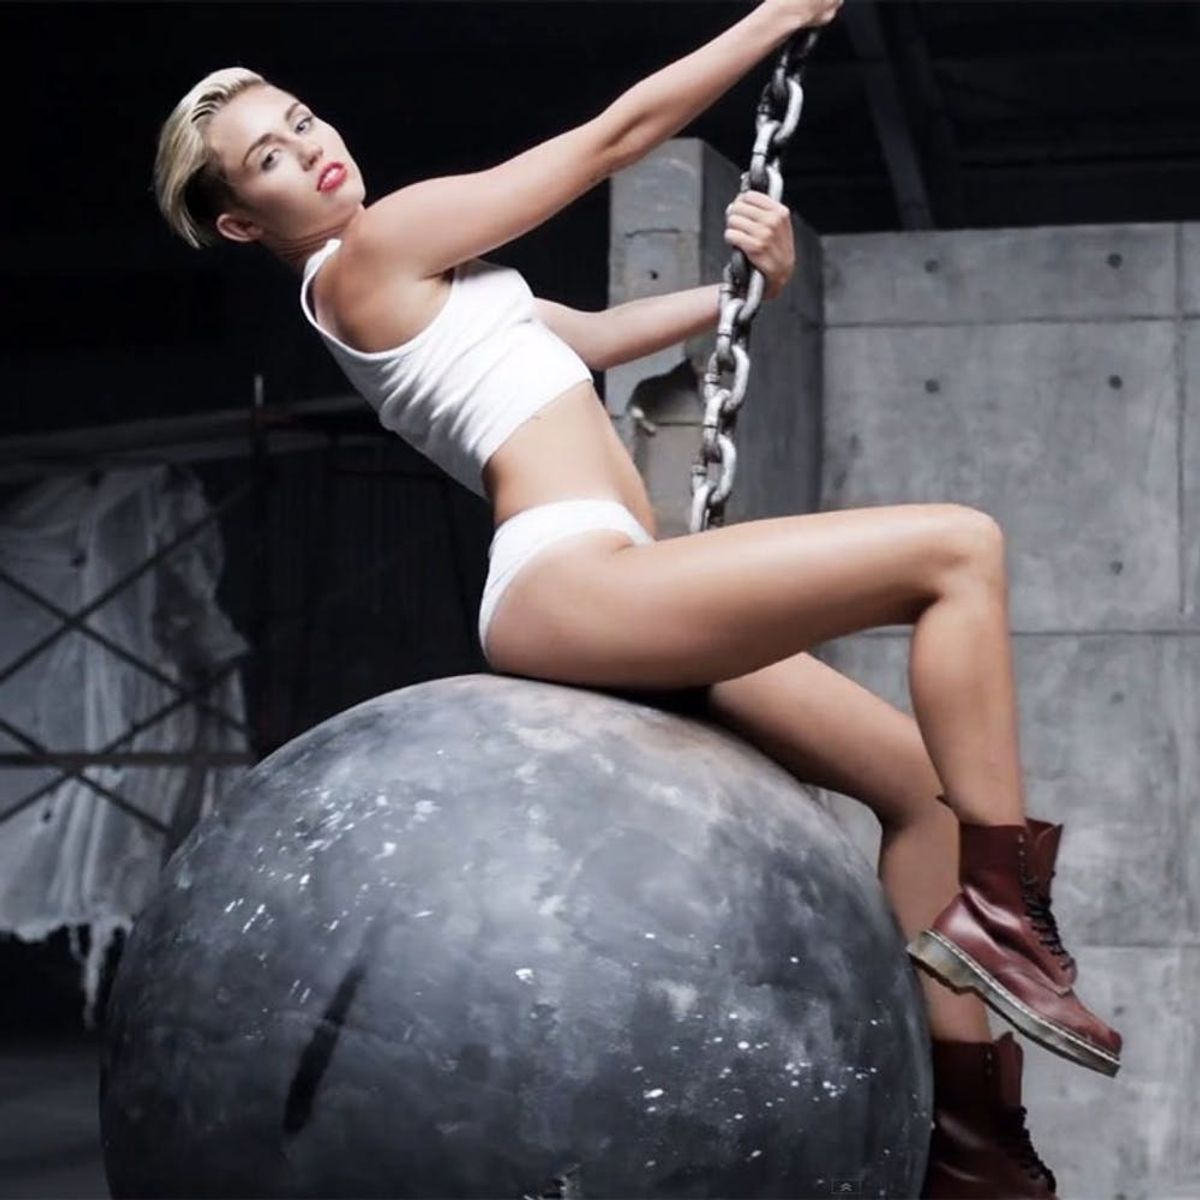 Miley Cyrus Reveals Why She Regrets Her “Wrecking Ball” Video